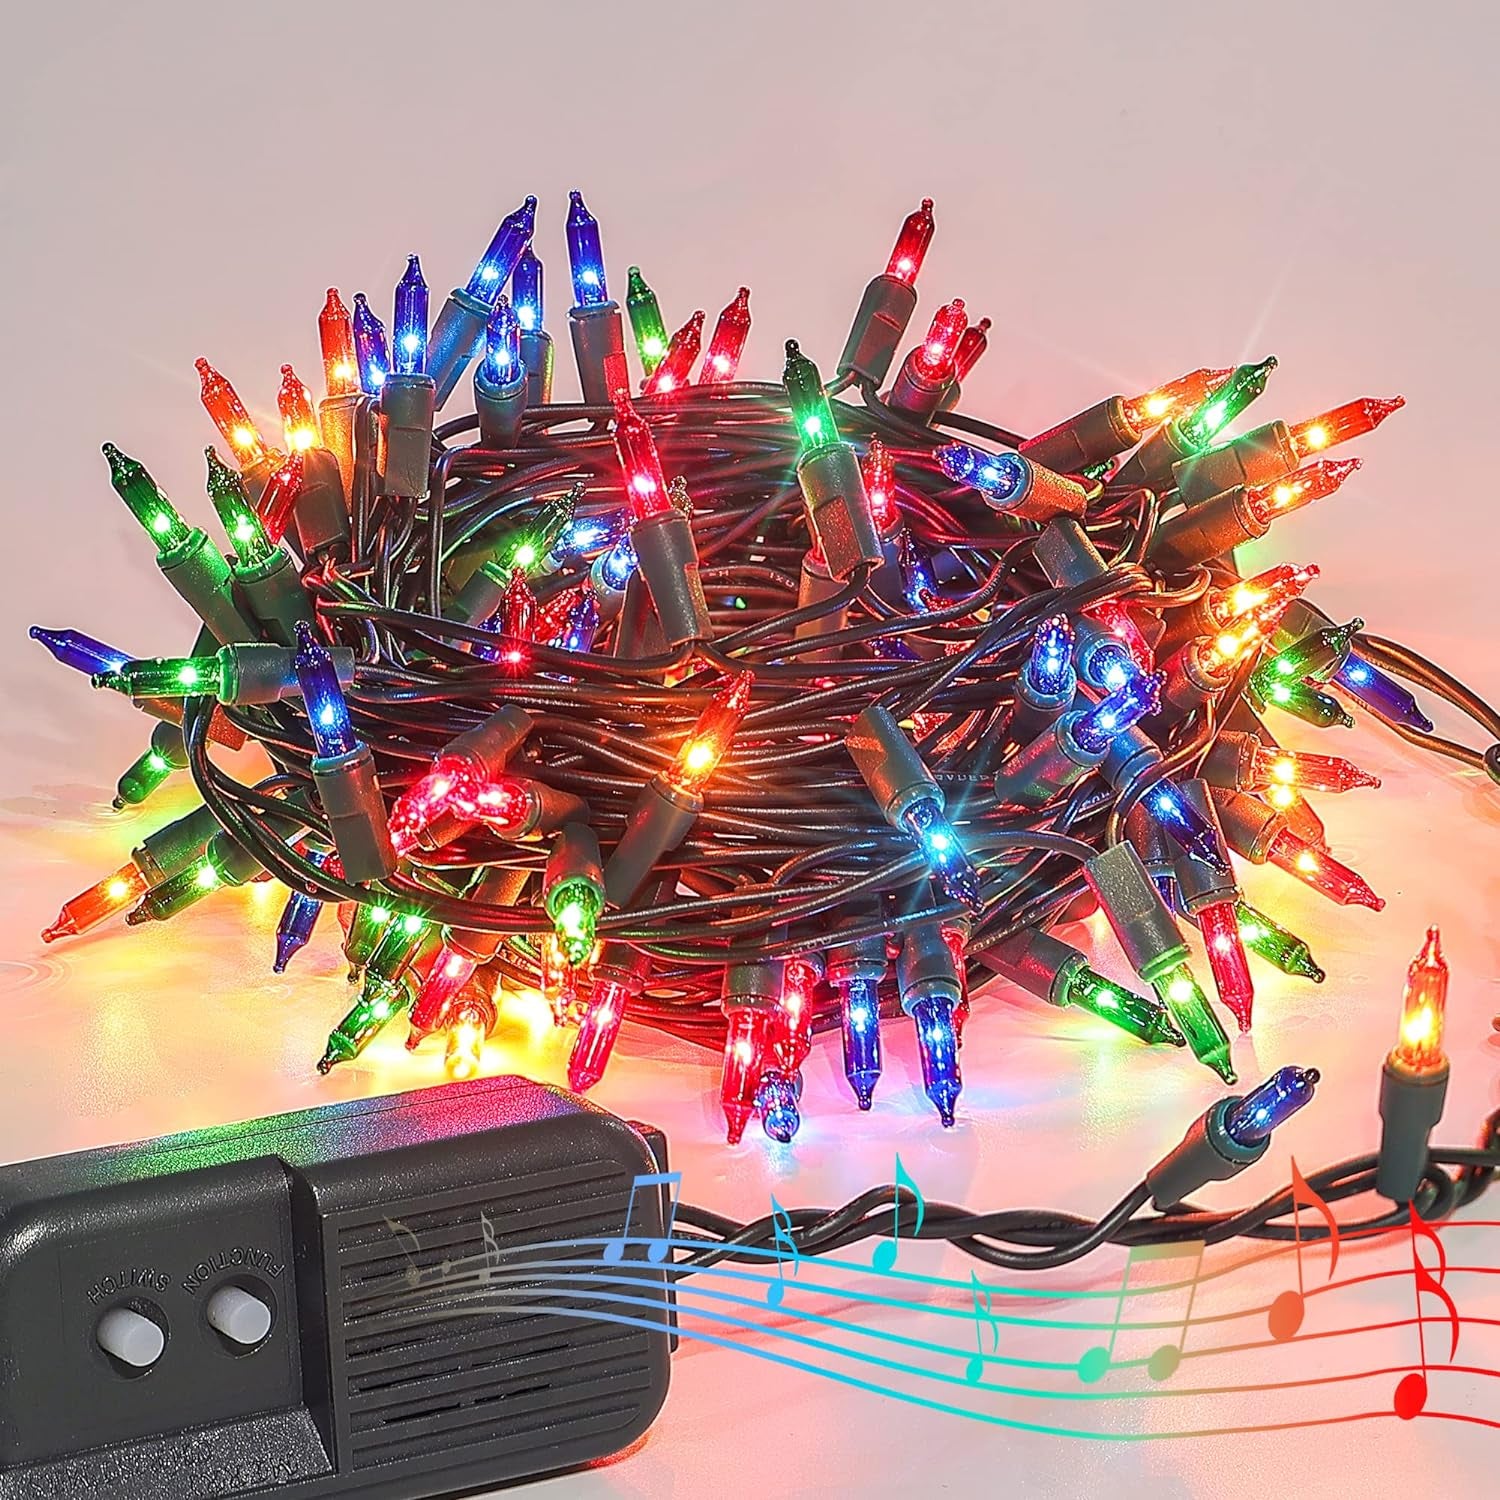 Spring Indoor/Outdoor Multi-Color Musical Christmas Lights - Plays 25 Classical Holiday Songs